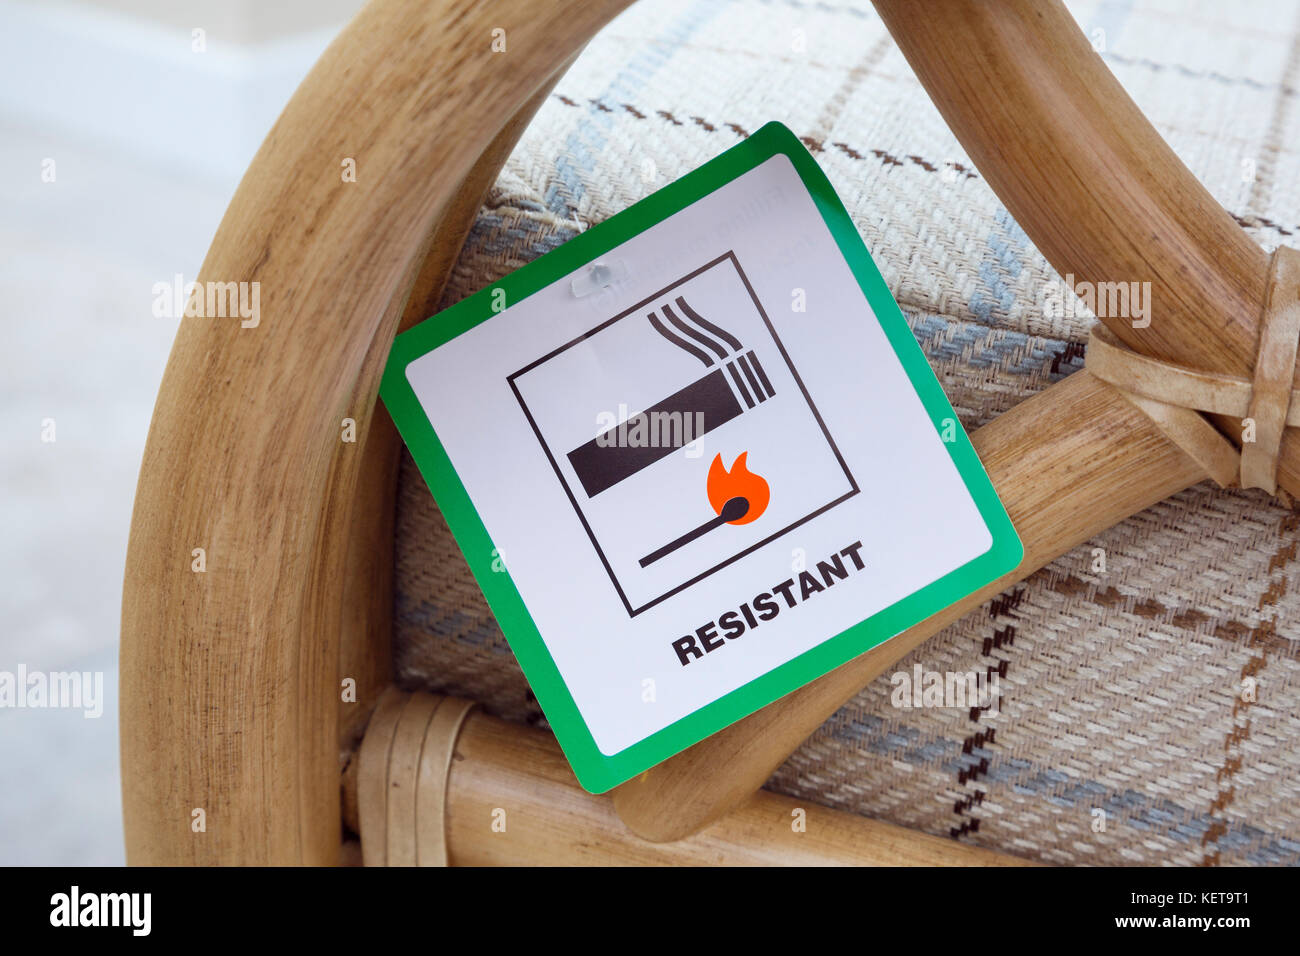 Fire Resistant and Flame Retardent display label on new soft furniture sofa chair resistant to cigarette and match ignition. England, UK, Britain Stock Photo